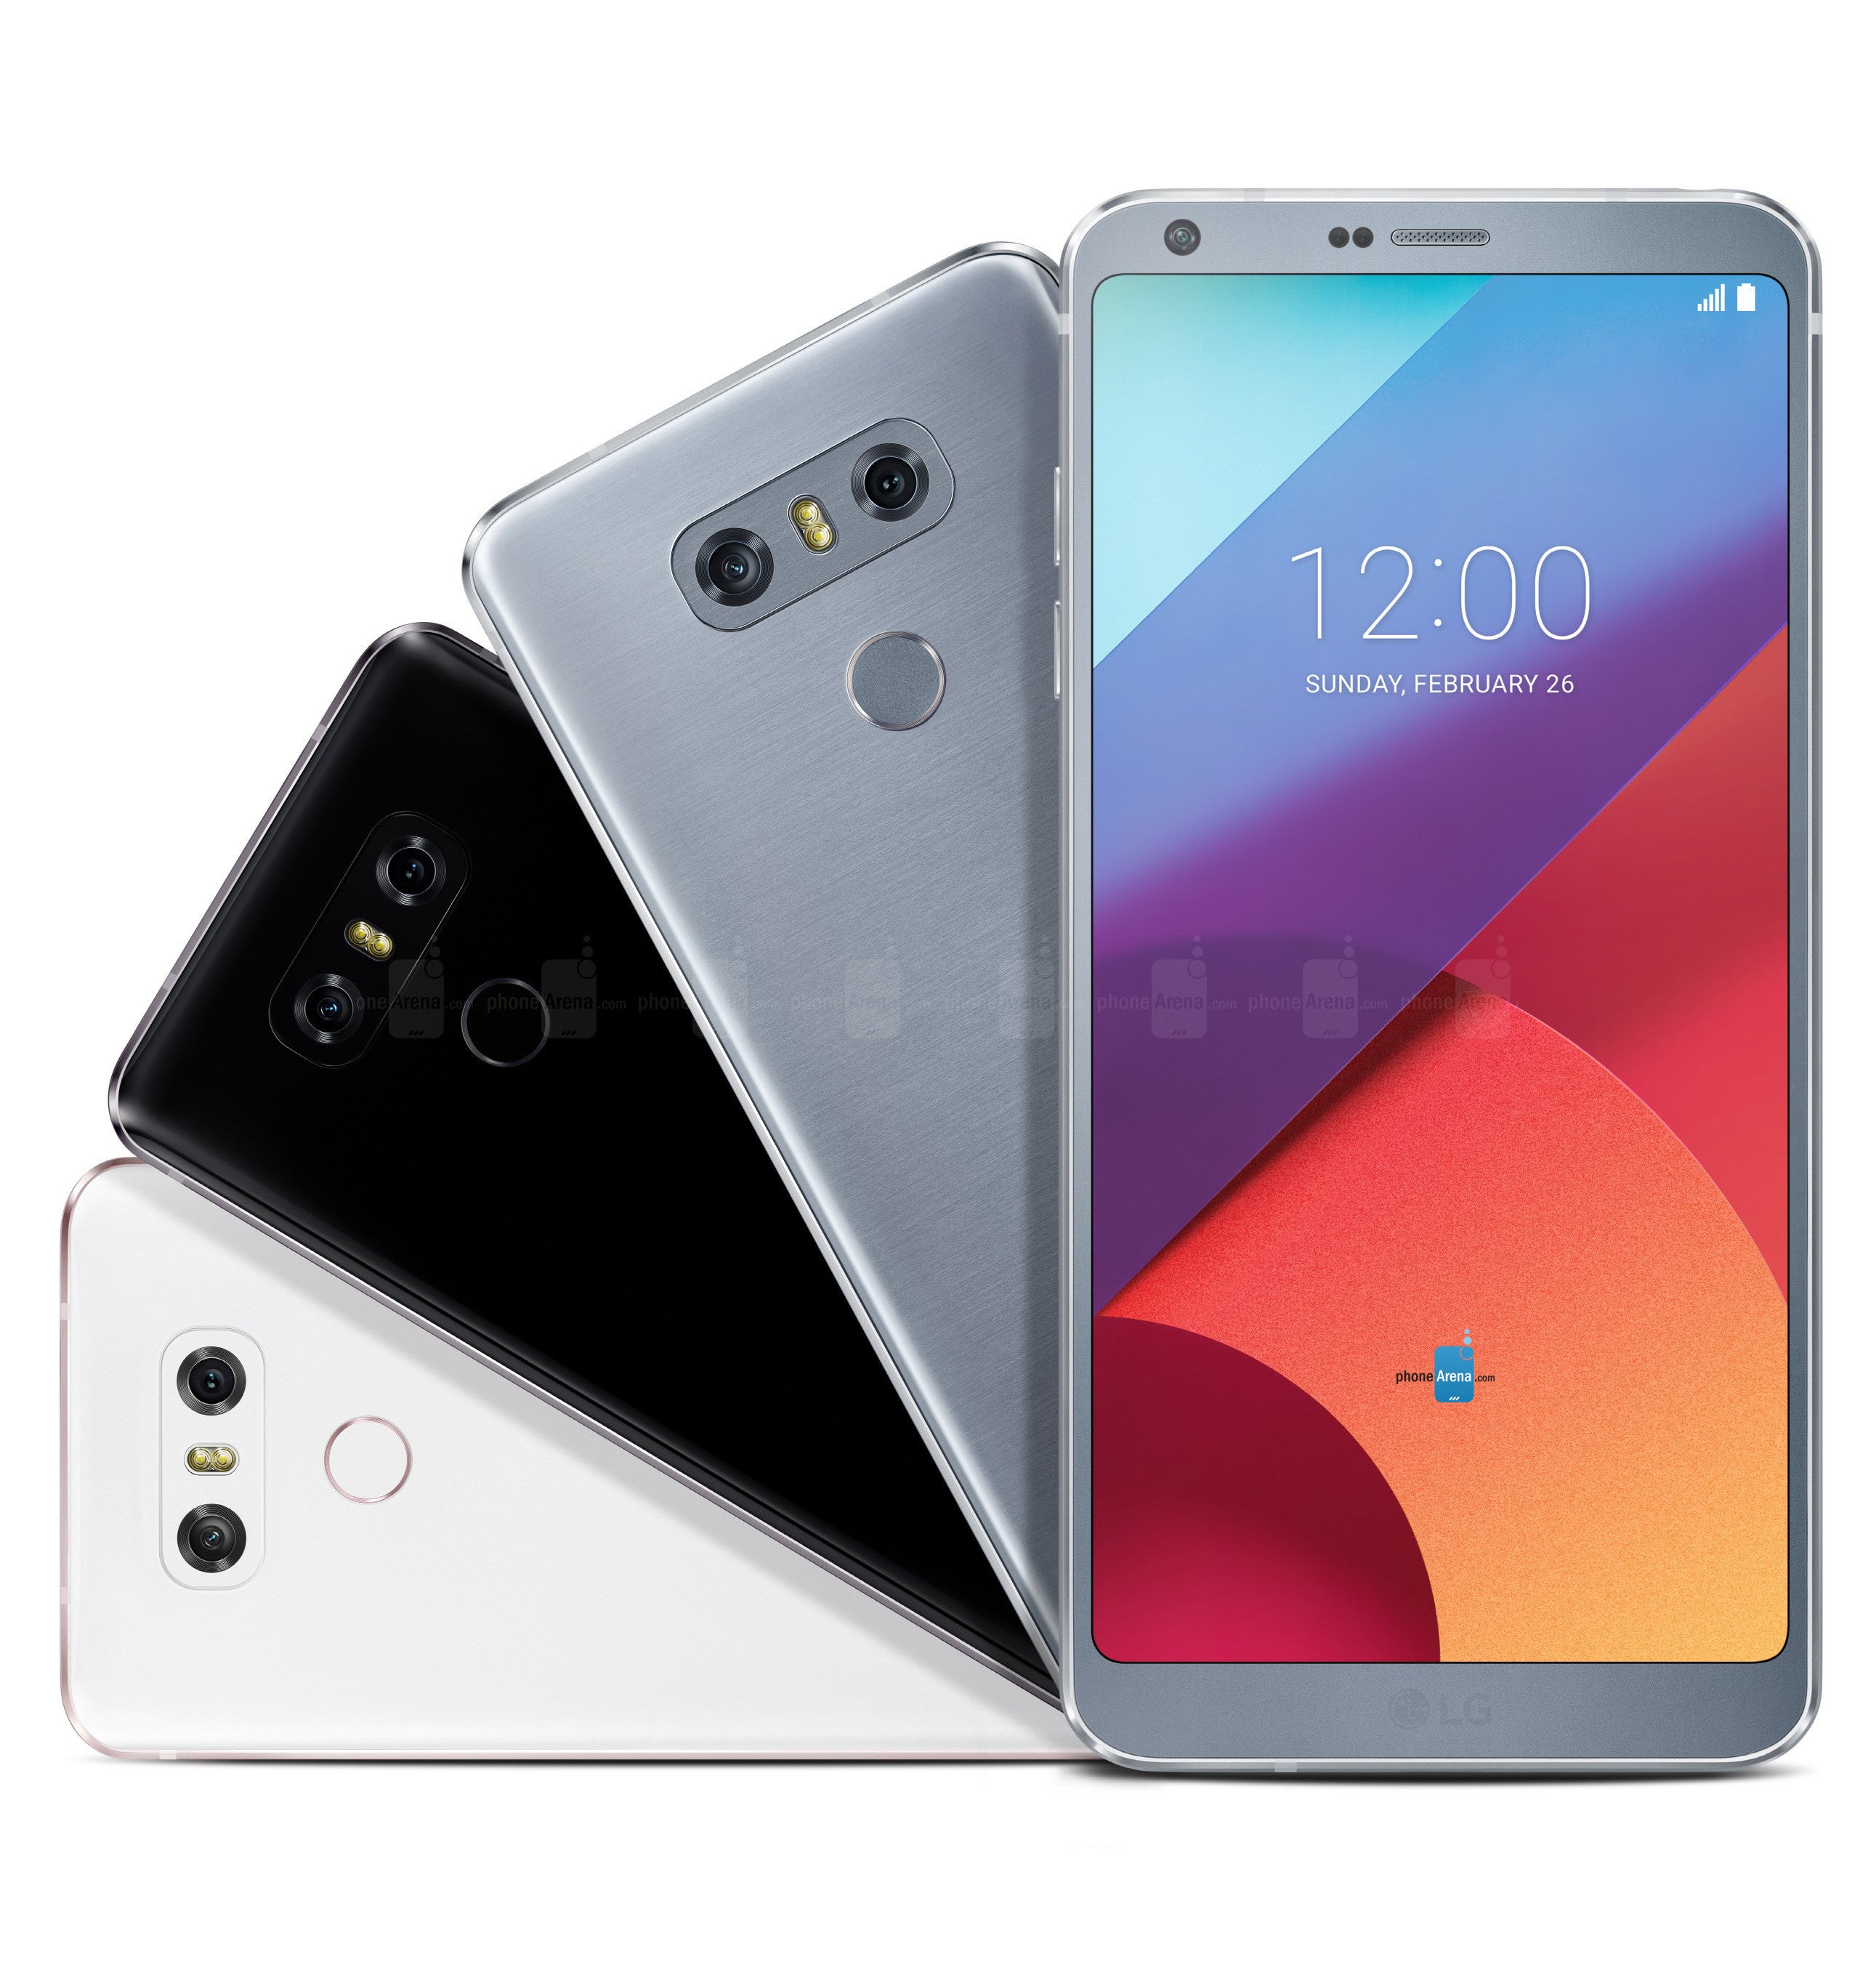 The LG G6 features an innovative FullVision display that's taller than that of most phones - What the Galaxy S8/S8+ and the LG G6 may look like next to an almost bezel-less iPhone 8